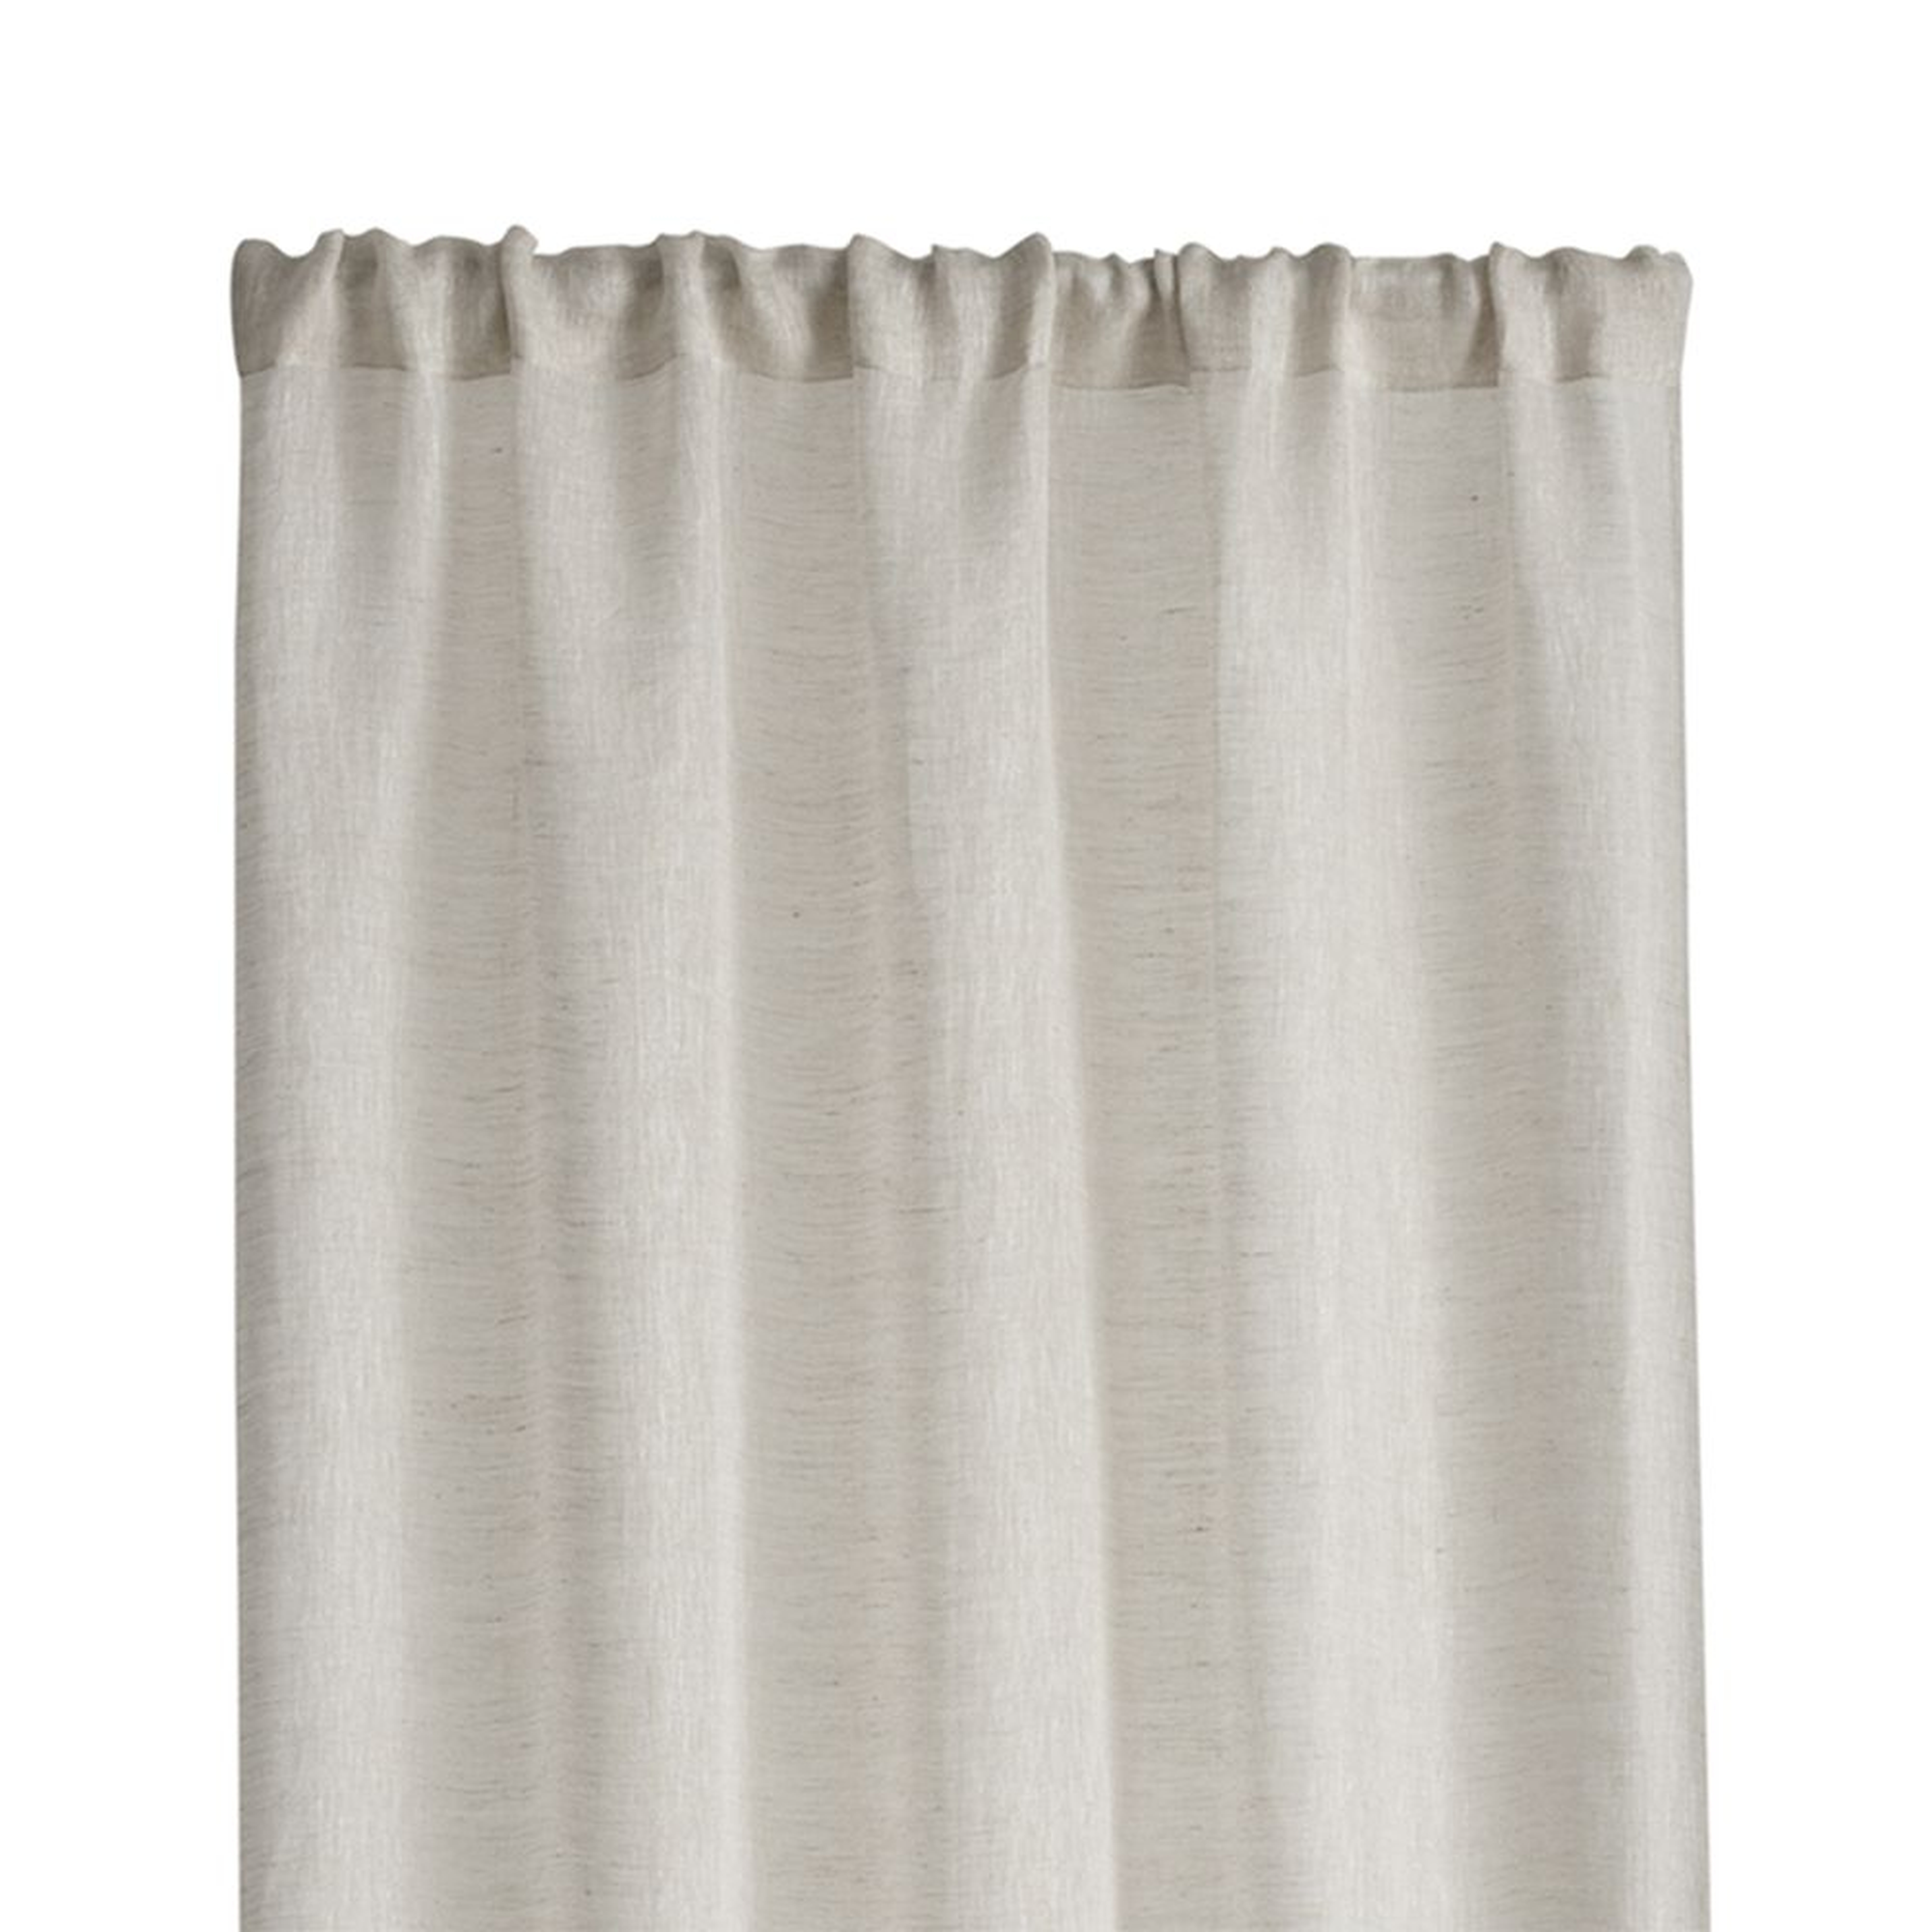 Linen Sheer 52"x108" Natural Curtain Panel - Crate and Barrel